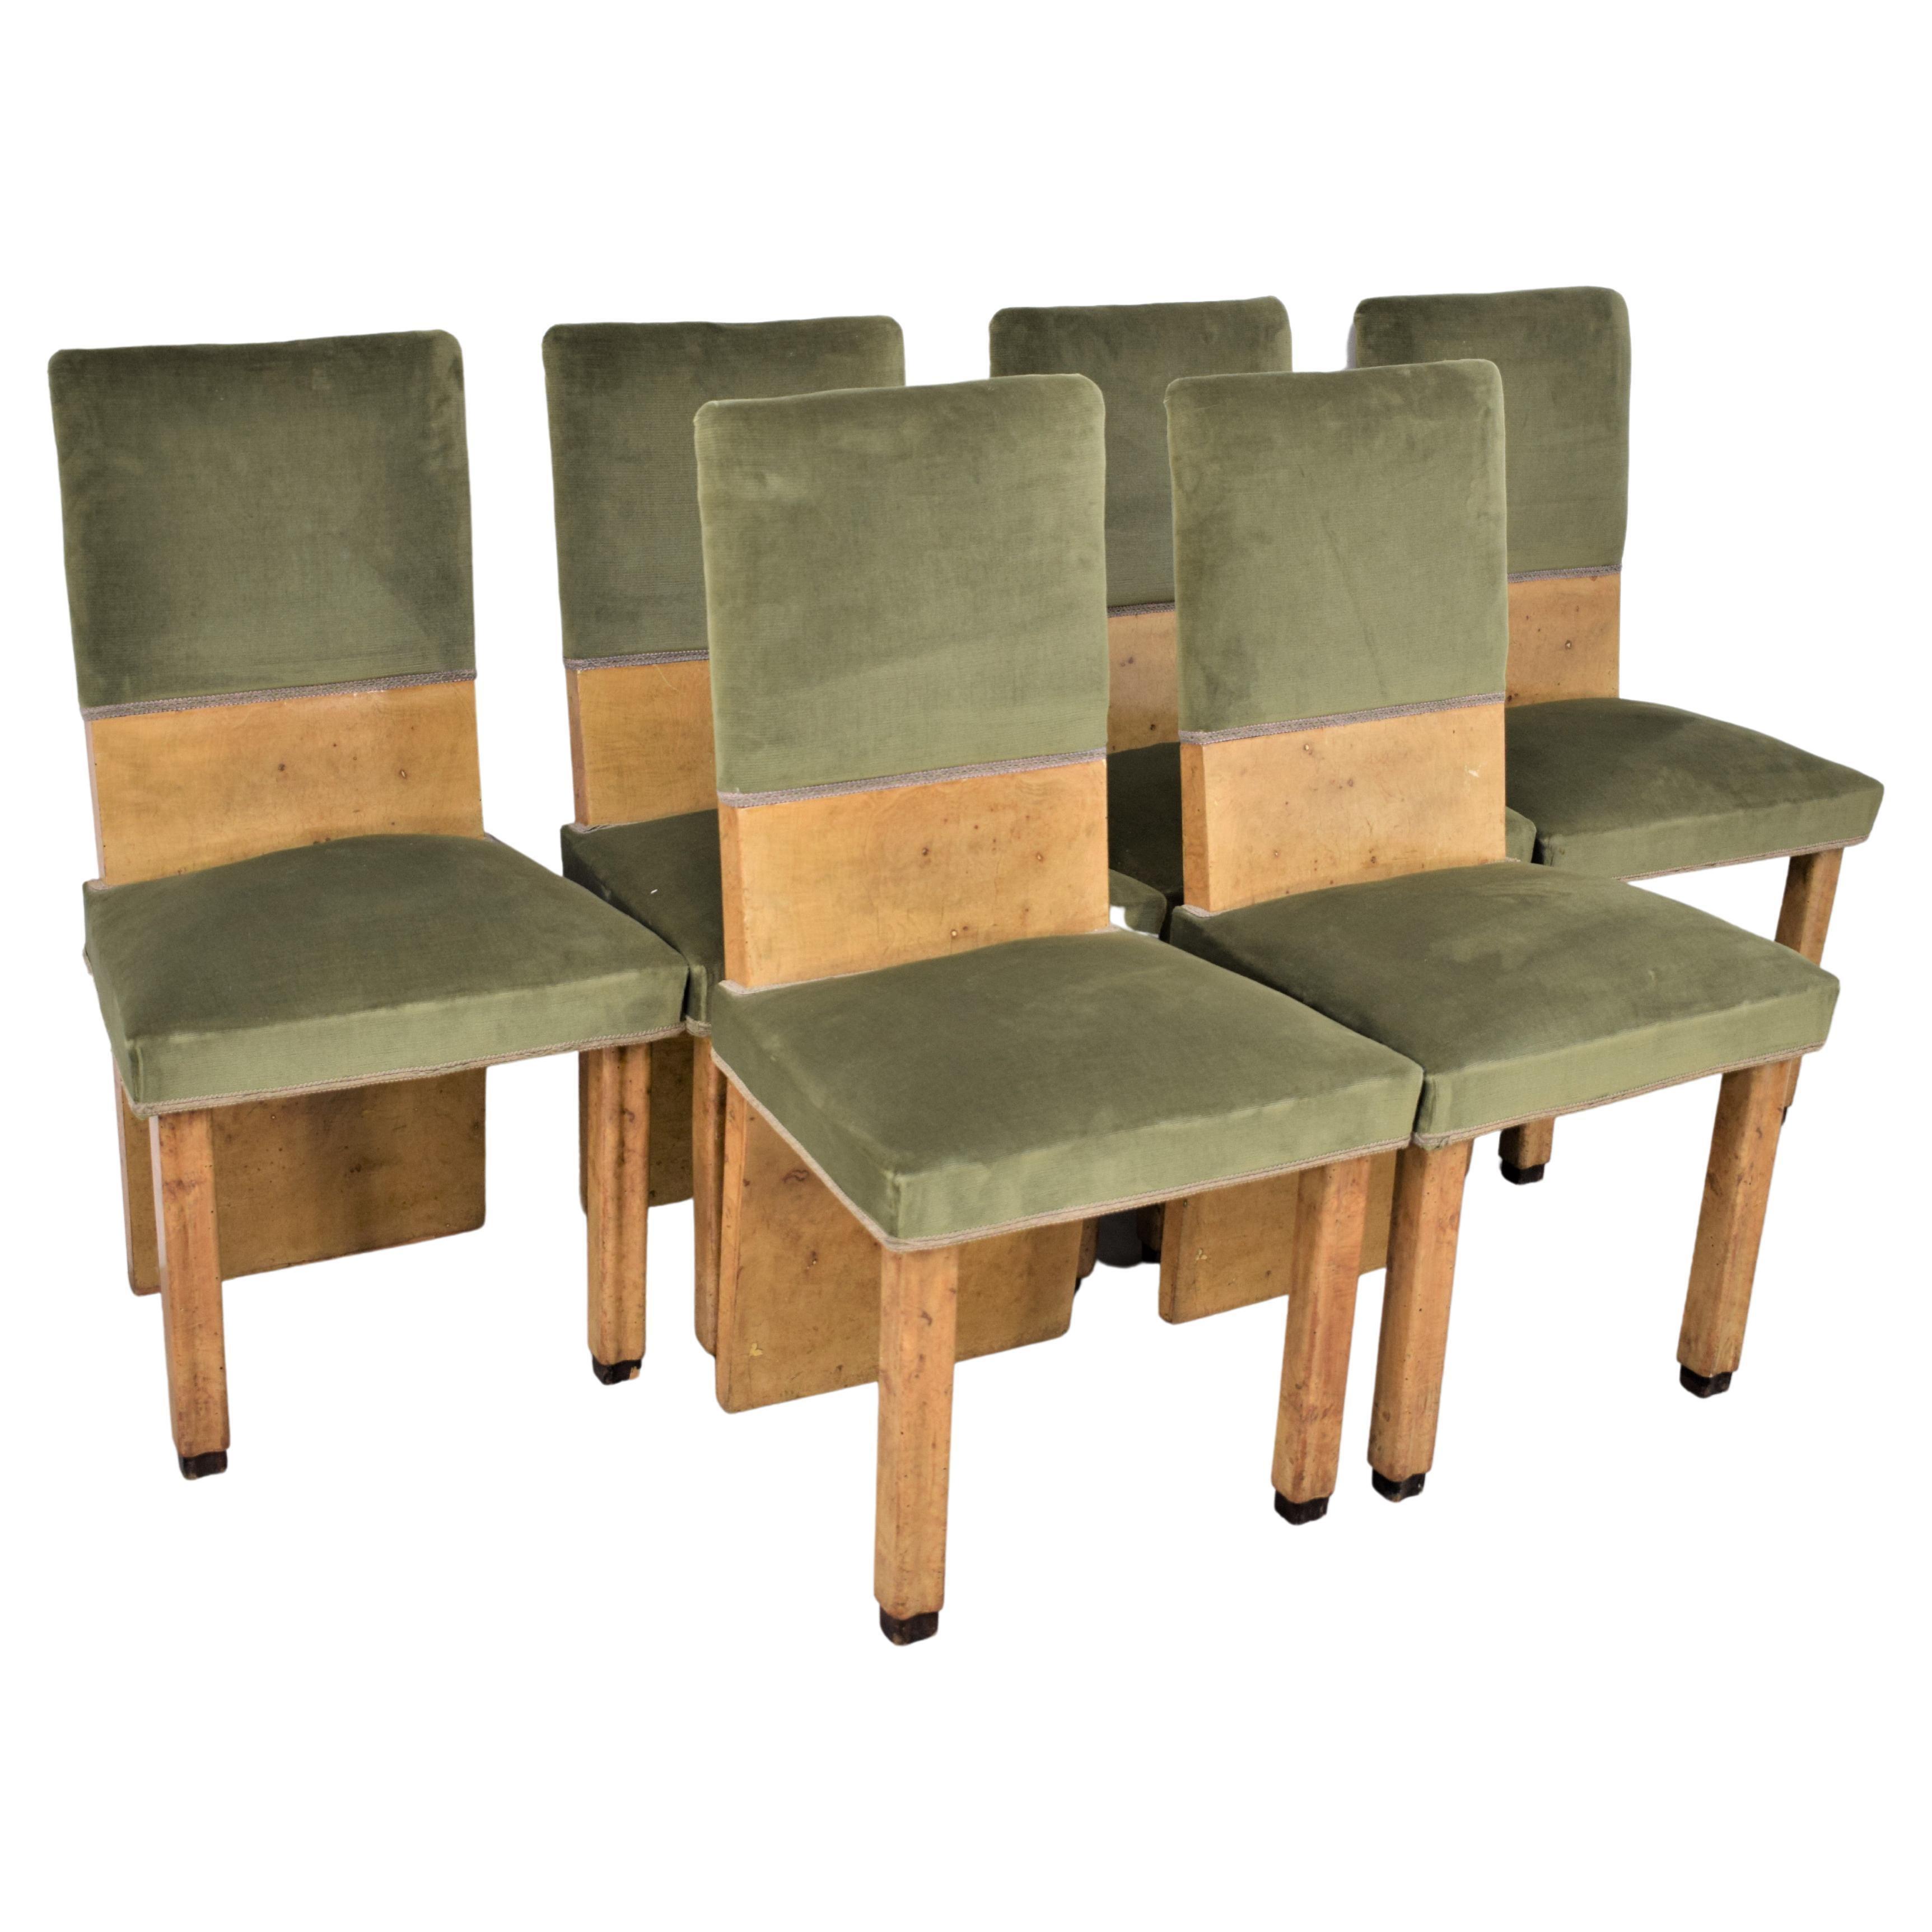 Set of Six Italian Chairs, 1930s For Sale